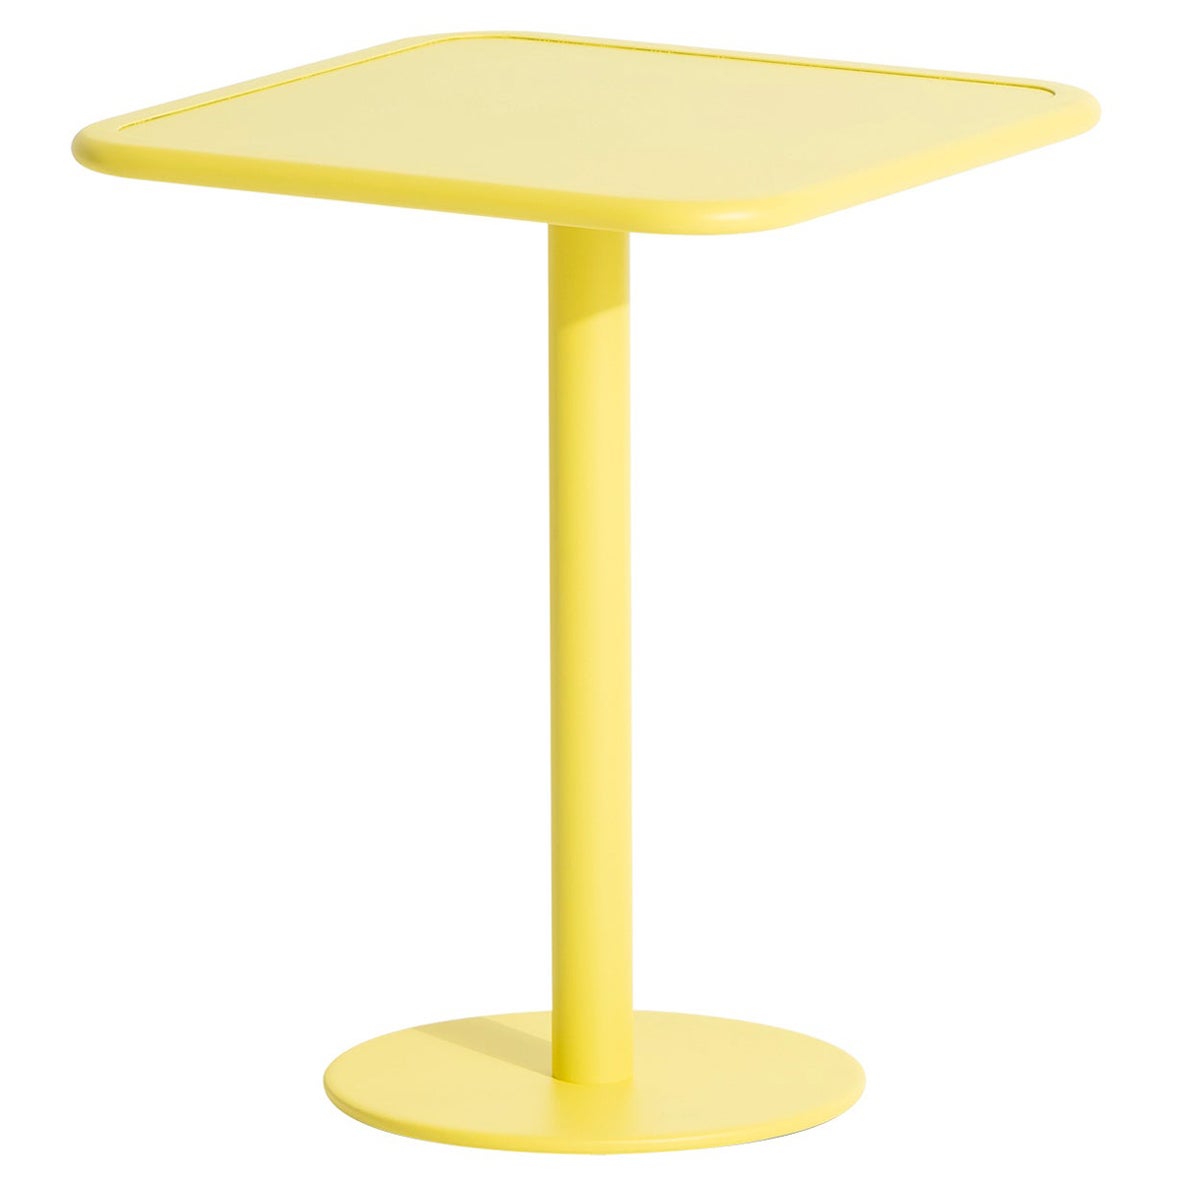 Petite Friture Week-End Bistro Square Dining Table in Yellow Aluminium, 2017 For Sale